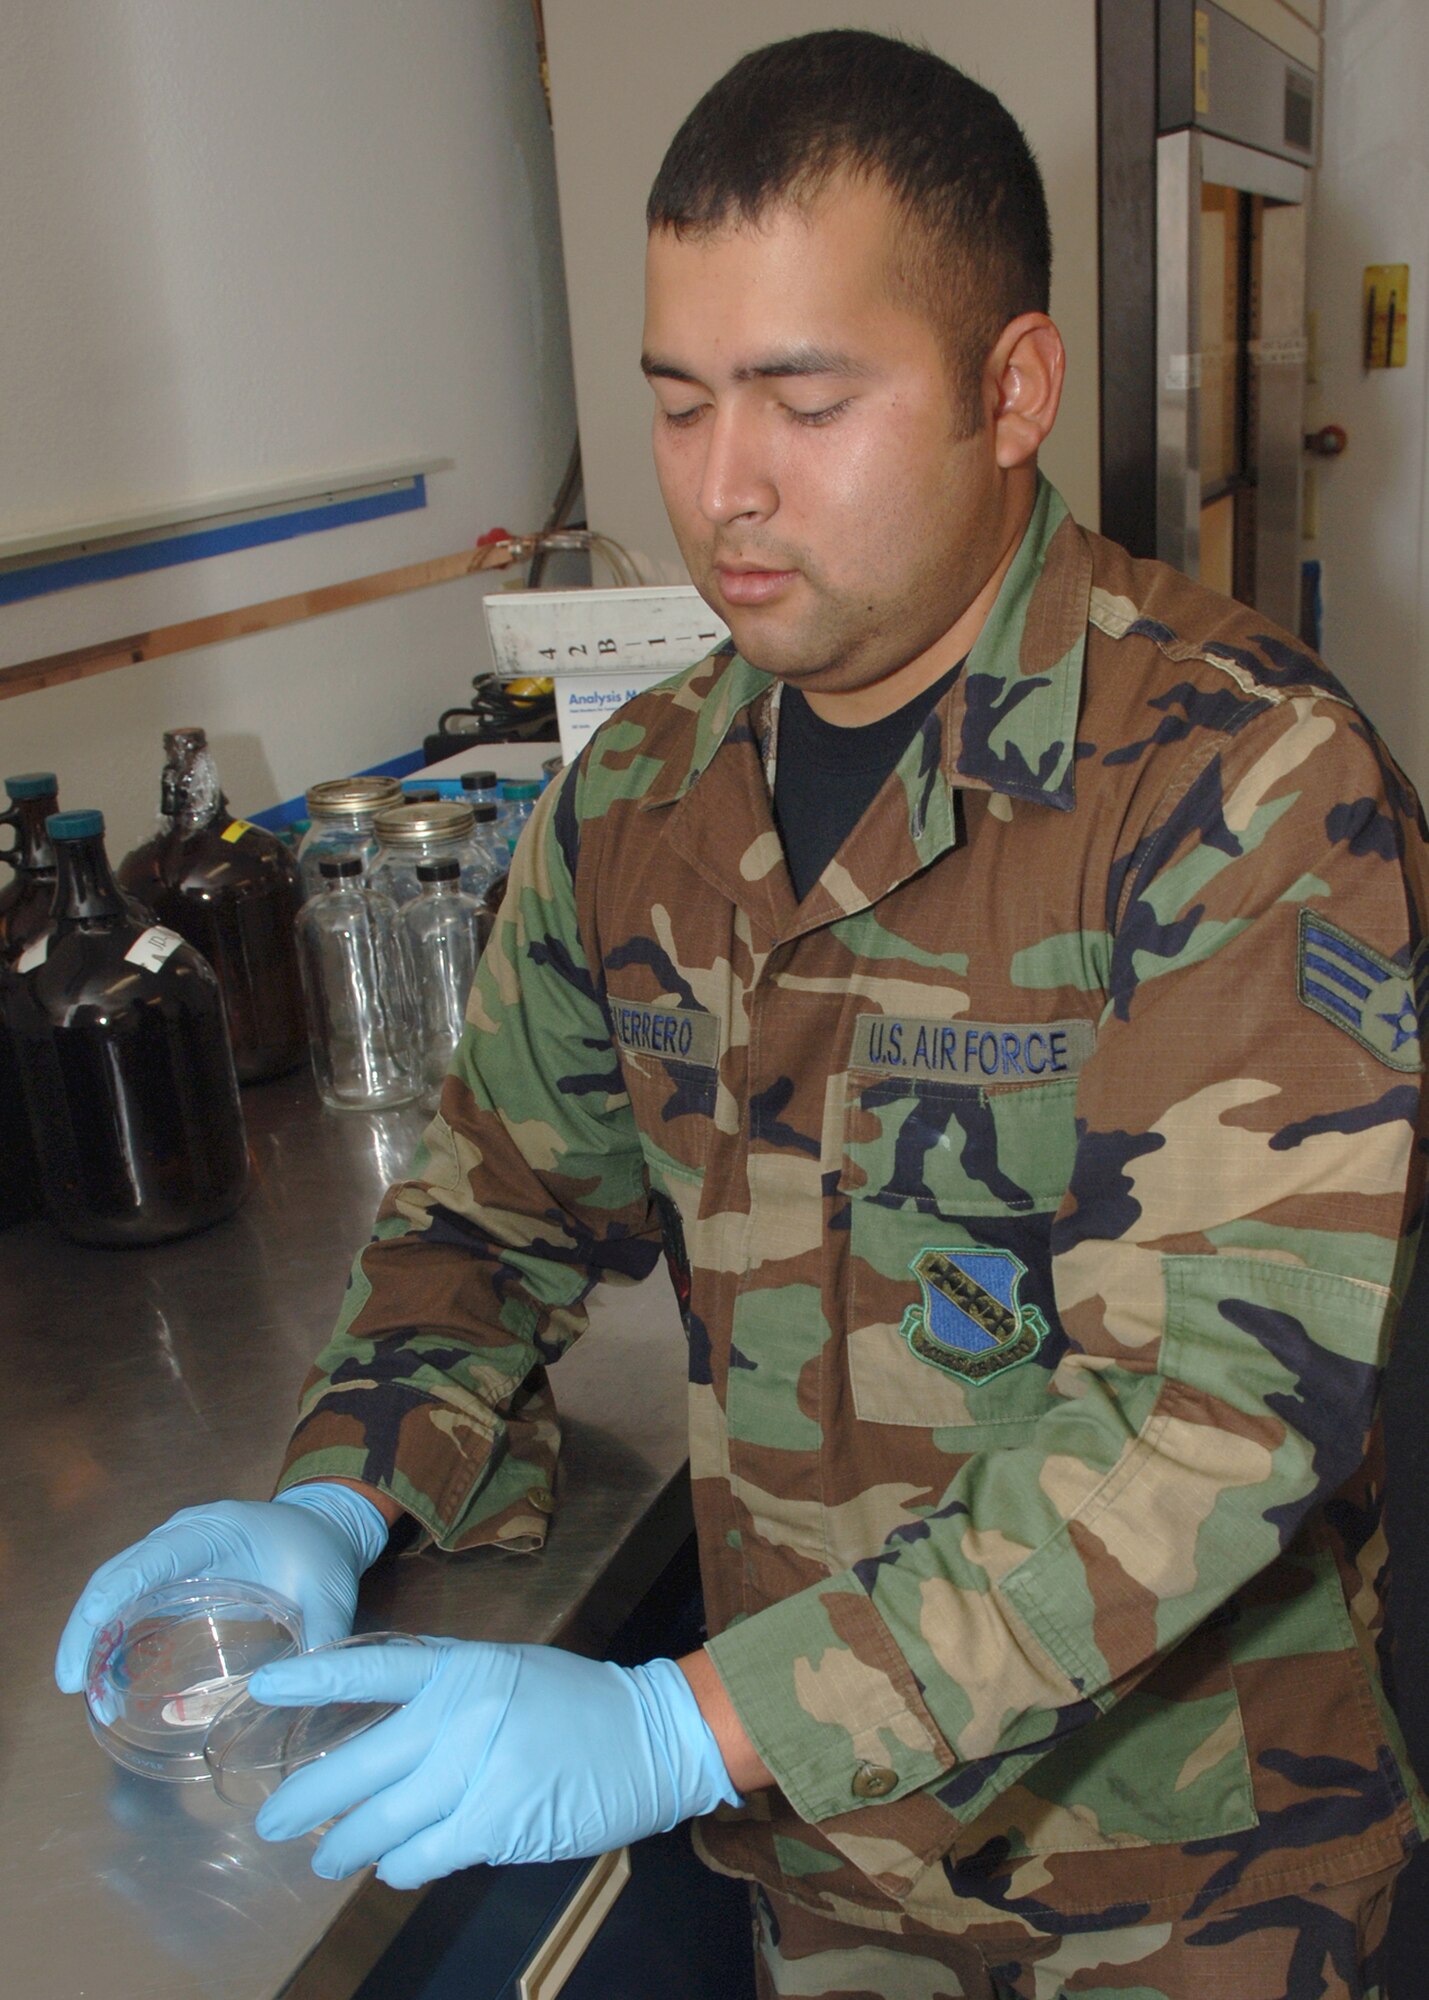 DYESS AIR FORCE BASE, Texas -- Senior Airman Rogelio Guerrero prepares a dish for examination April 24. The filter paper will be tested to see how much sediment was filtered out from a one gallon sample of JP-8 fuel. (U.S. Air Force Photo by Airman 1st Class Micheal Breaux)